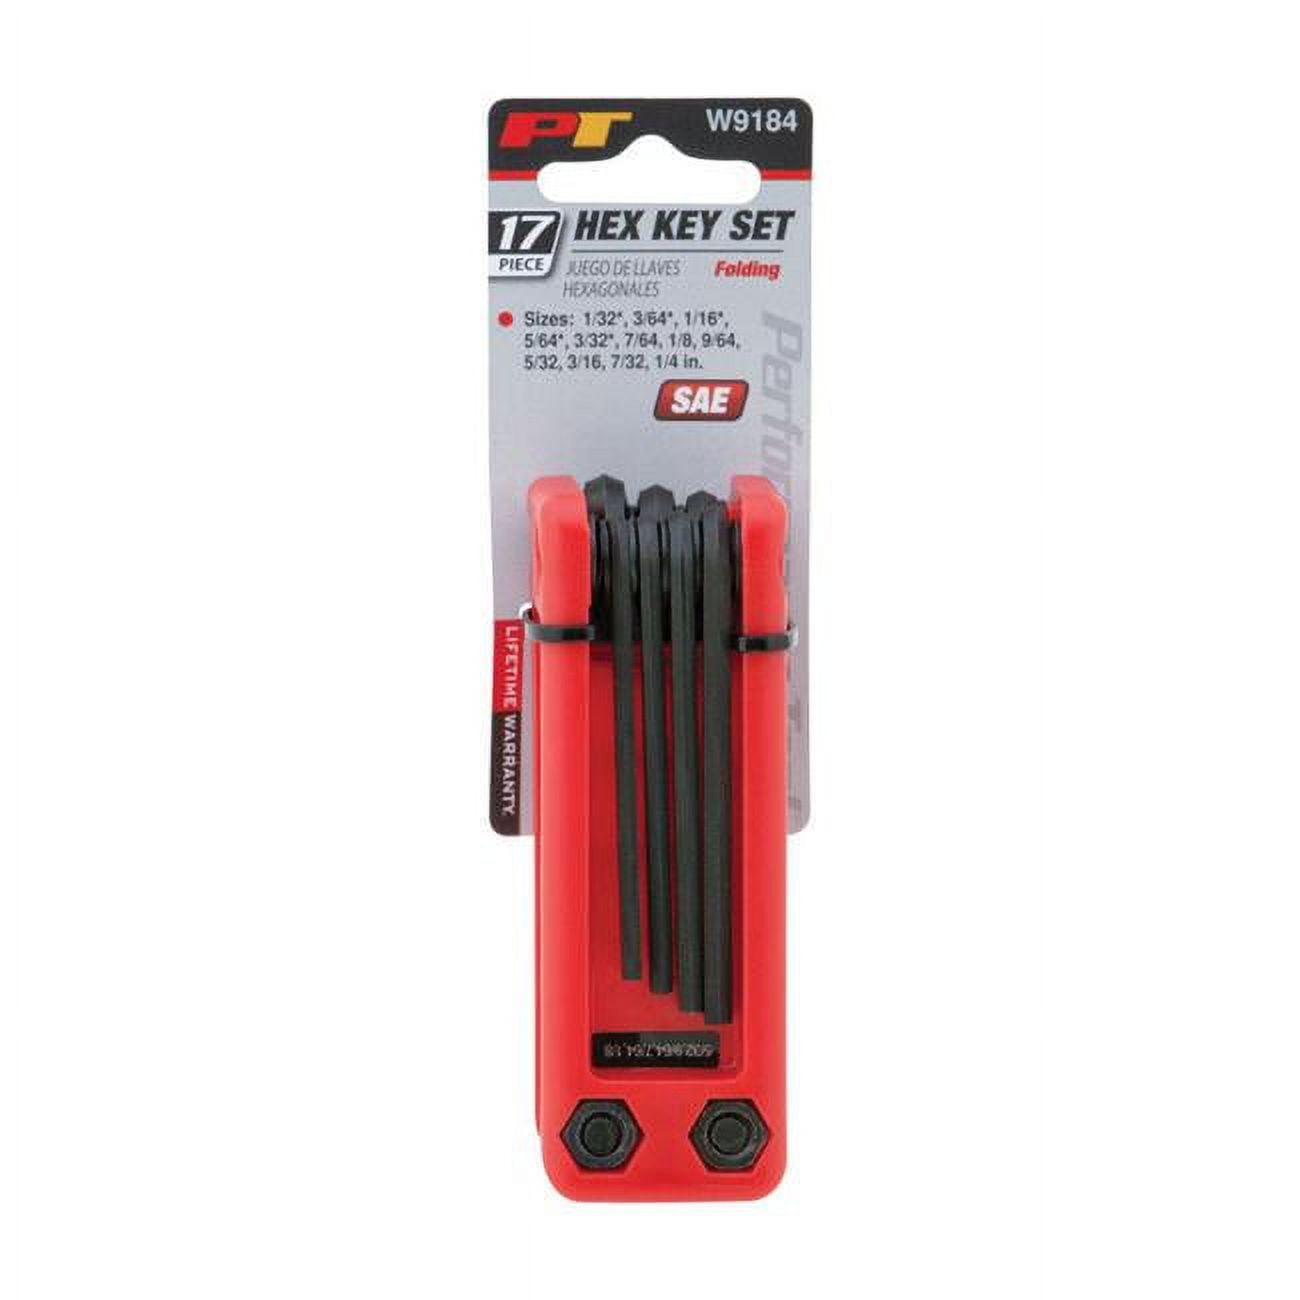 2797025 Sae Fold-up Hex Key Set, 17 Piece - Pack Of 6